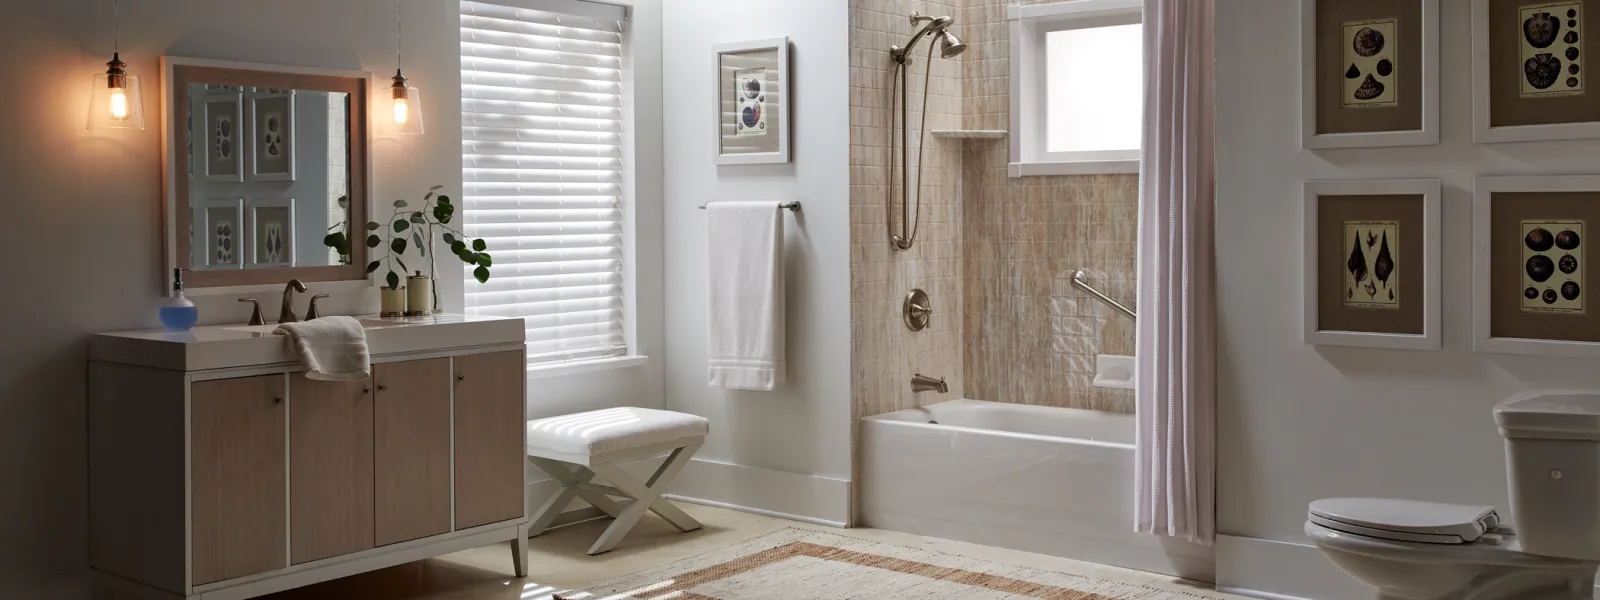 How Long Does it Take to Remodel a Bathroom?